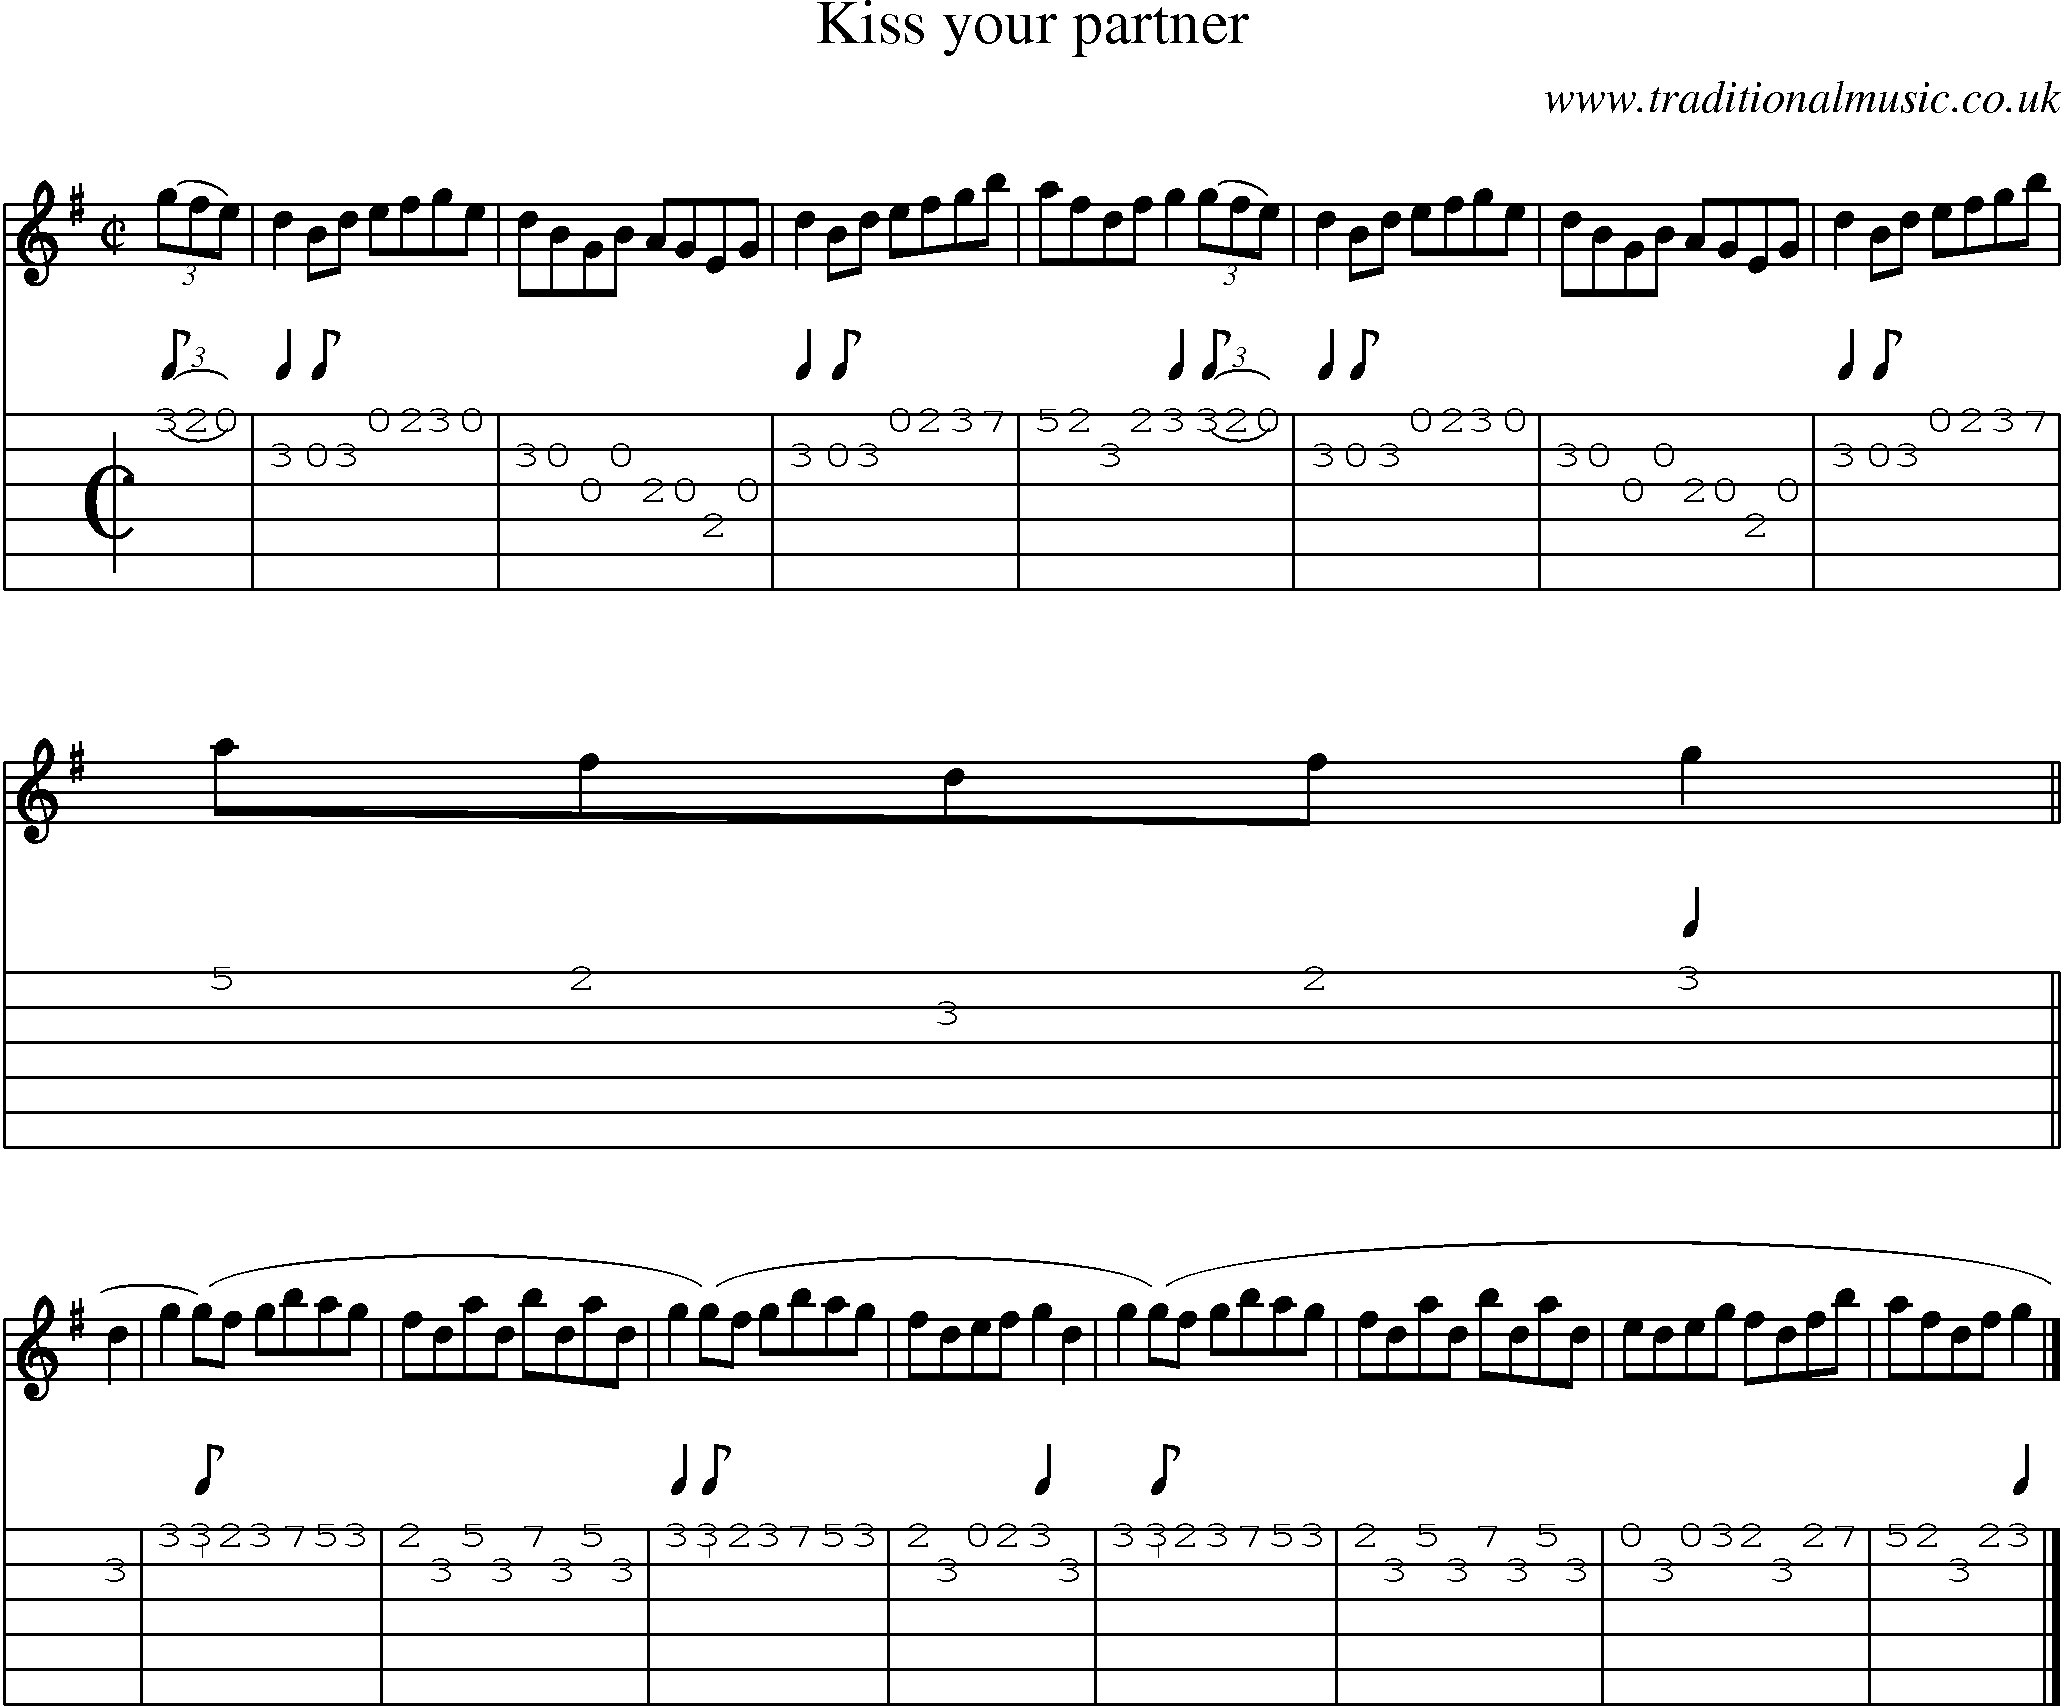 Music Score and Guitar Tabs for Kiss Your Partner